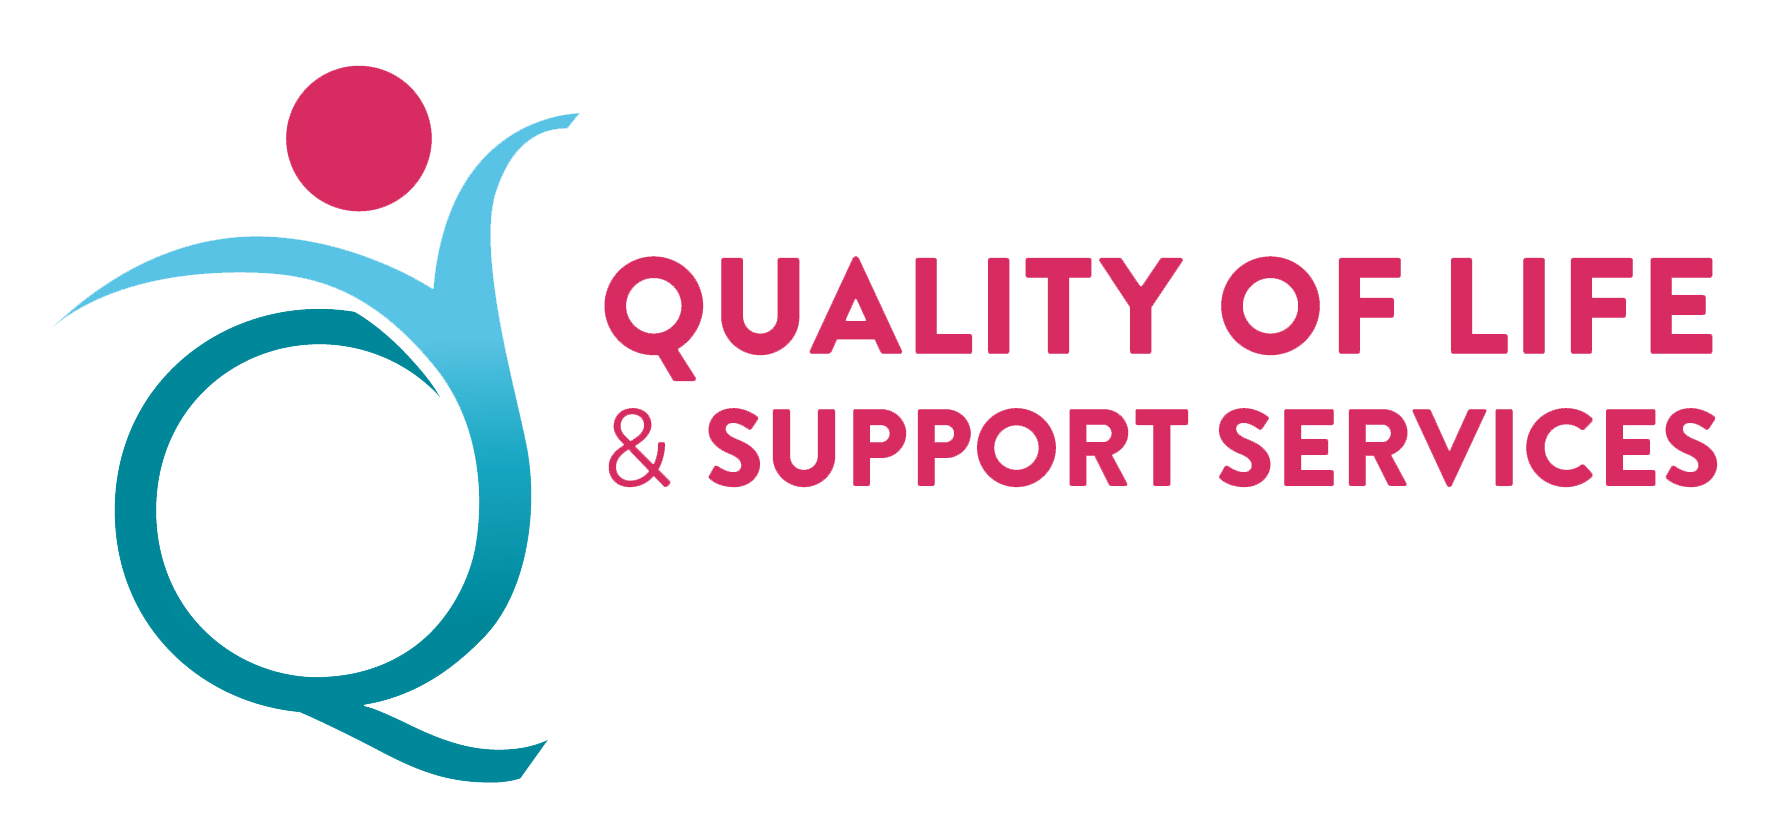 Quality of Life & Support Services: From words to action